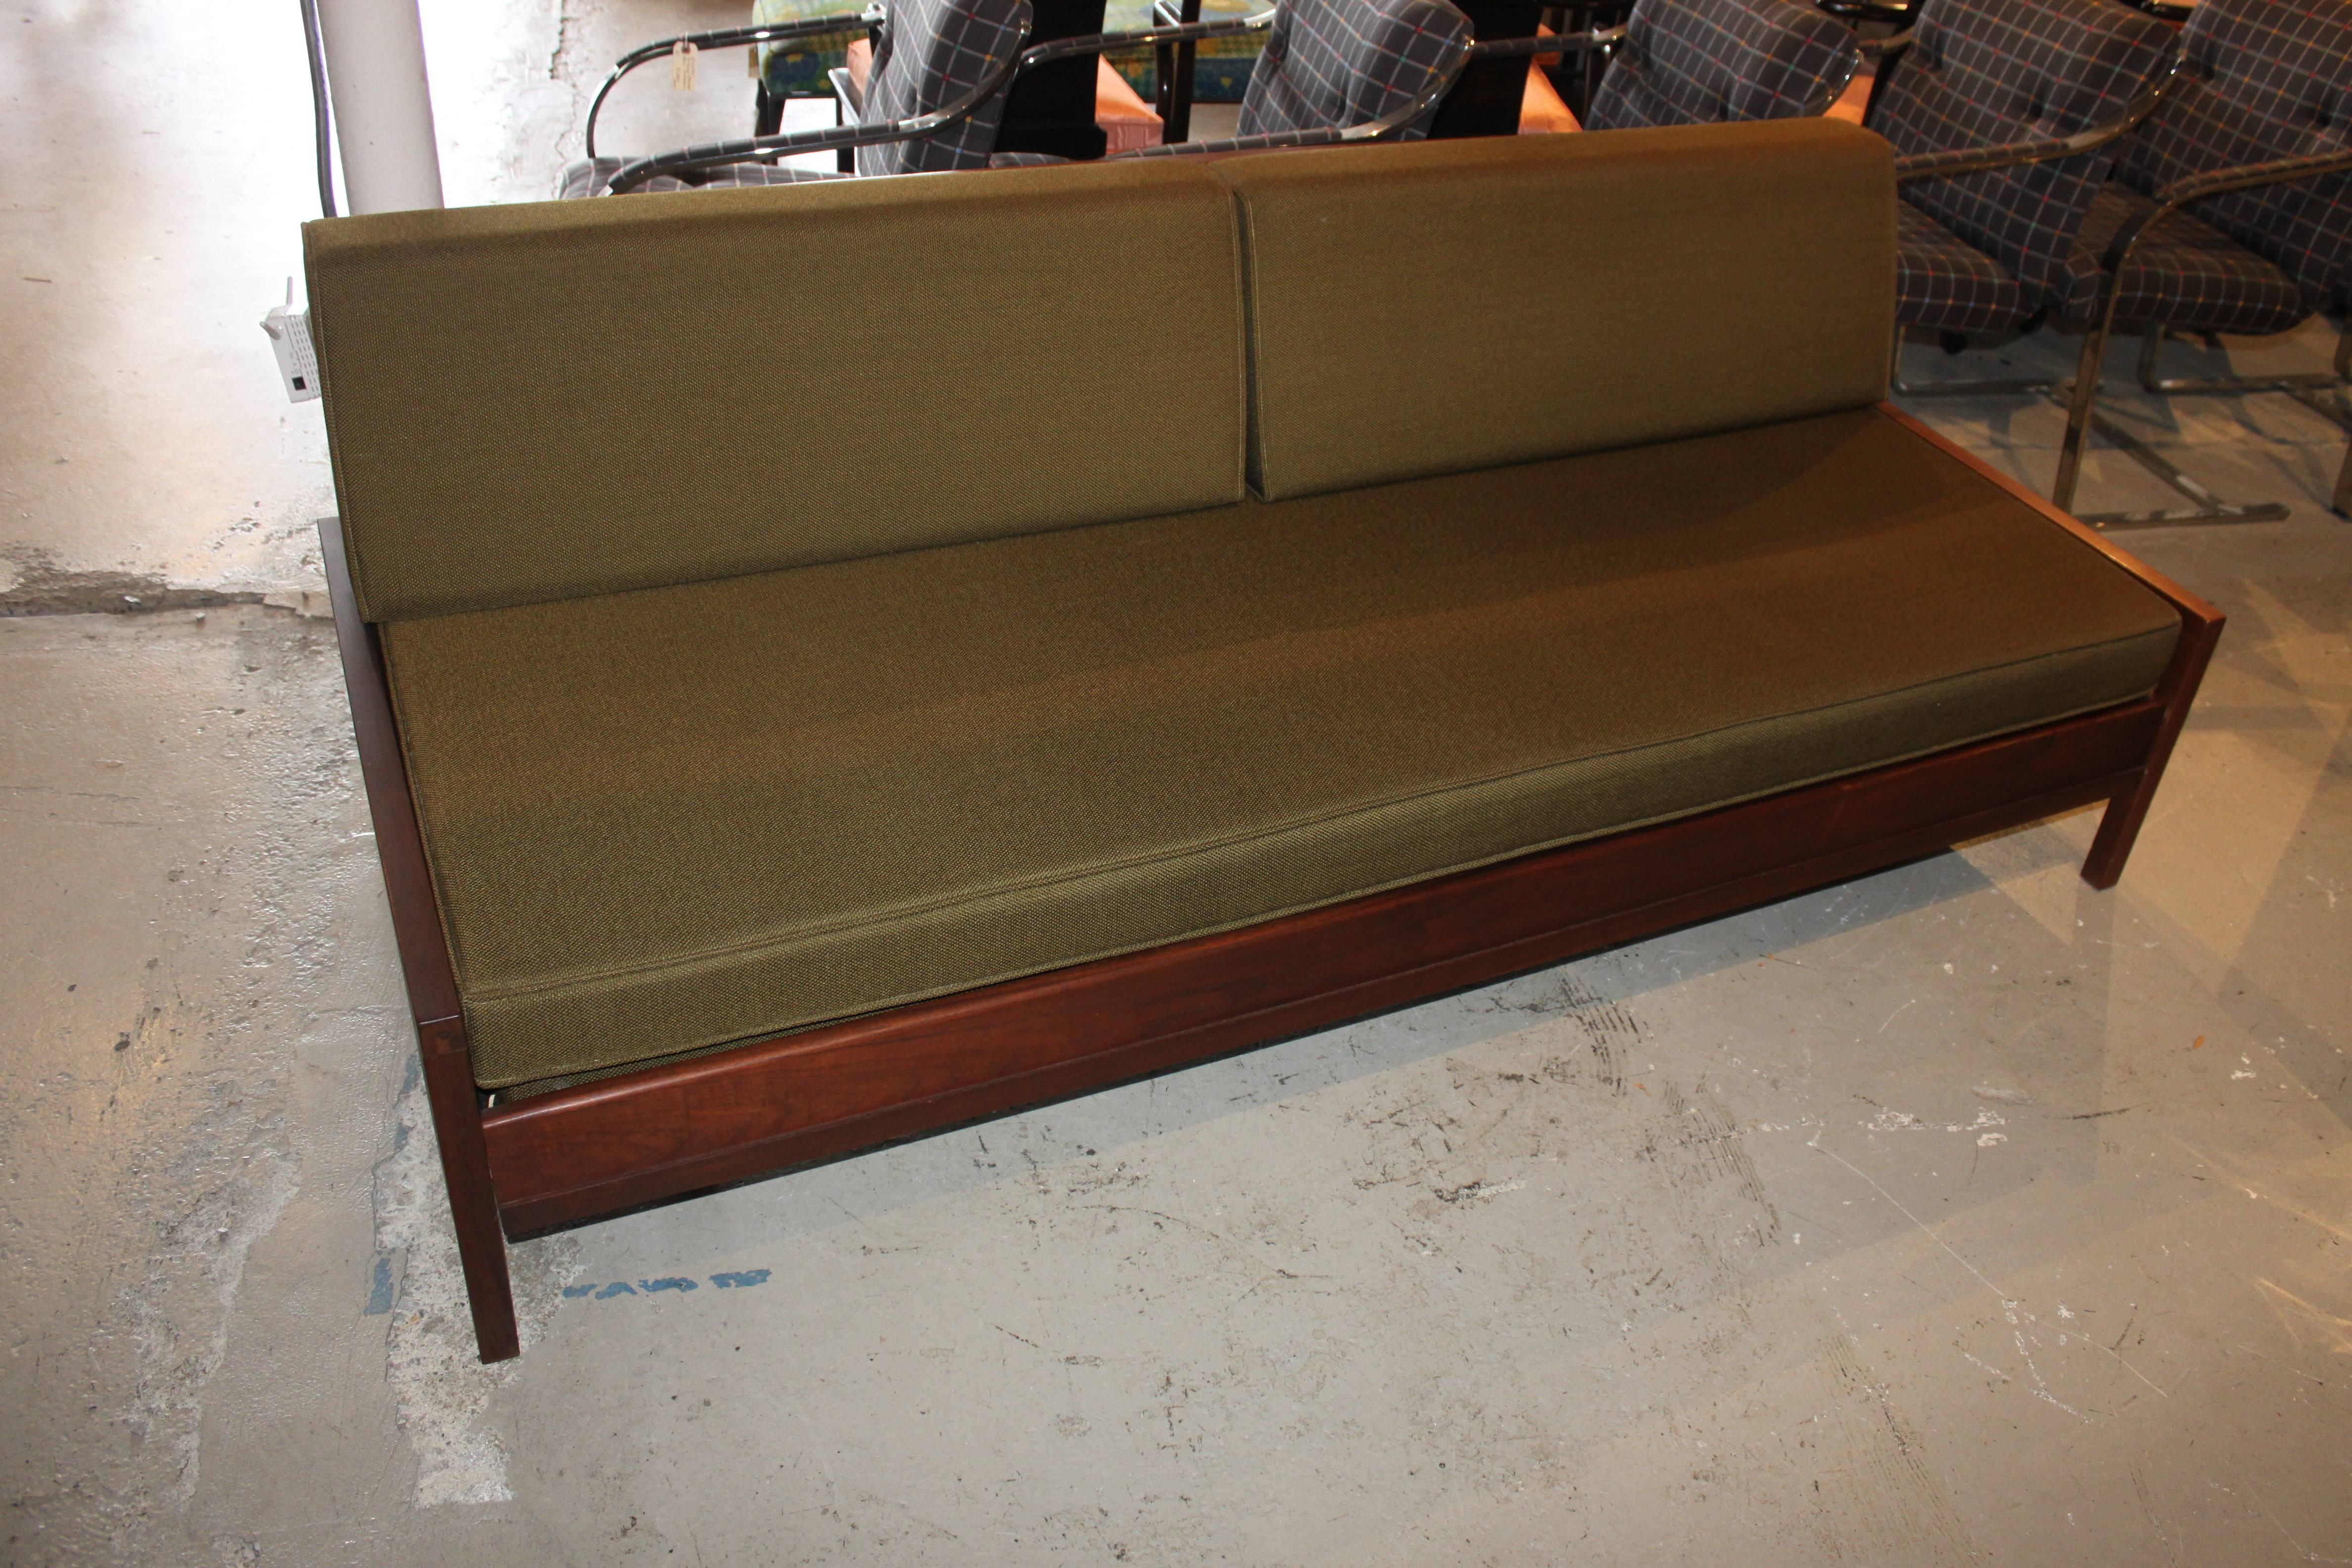 Mid-Century Modern daybed sofa with trundle. Comes with the original cushions at buyer's request. It is in very good shape. Solid walnut frame and simple modern design. Perfect for the space limited room or apartment. Measure: Seat height 15.75